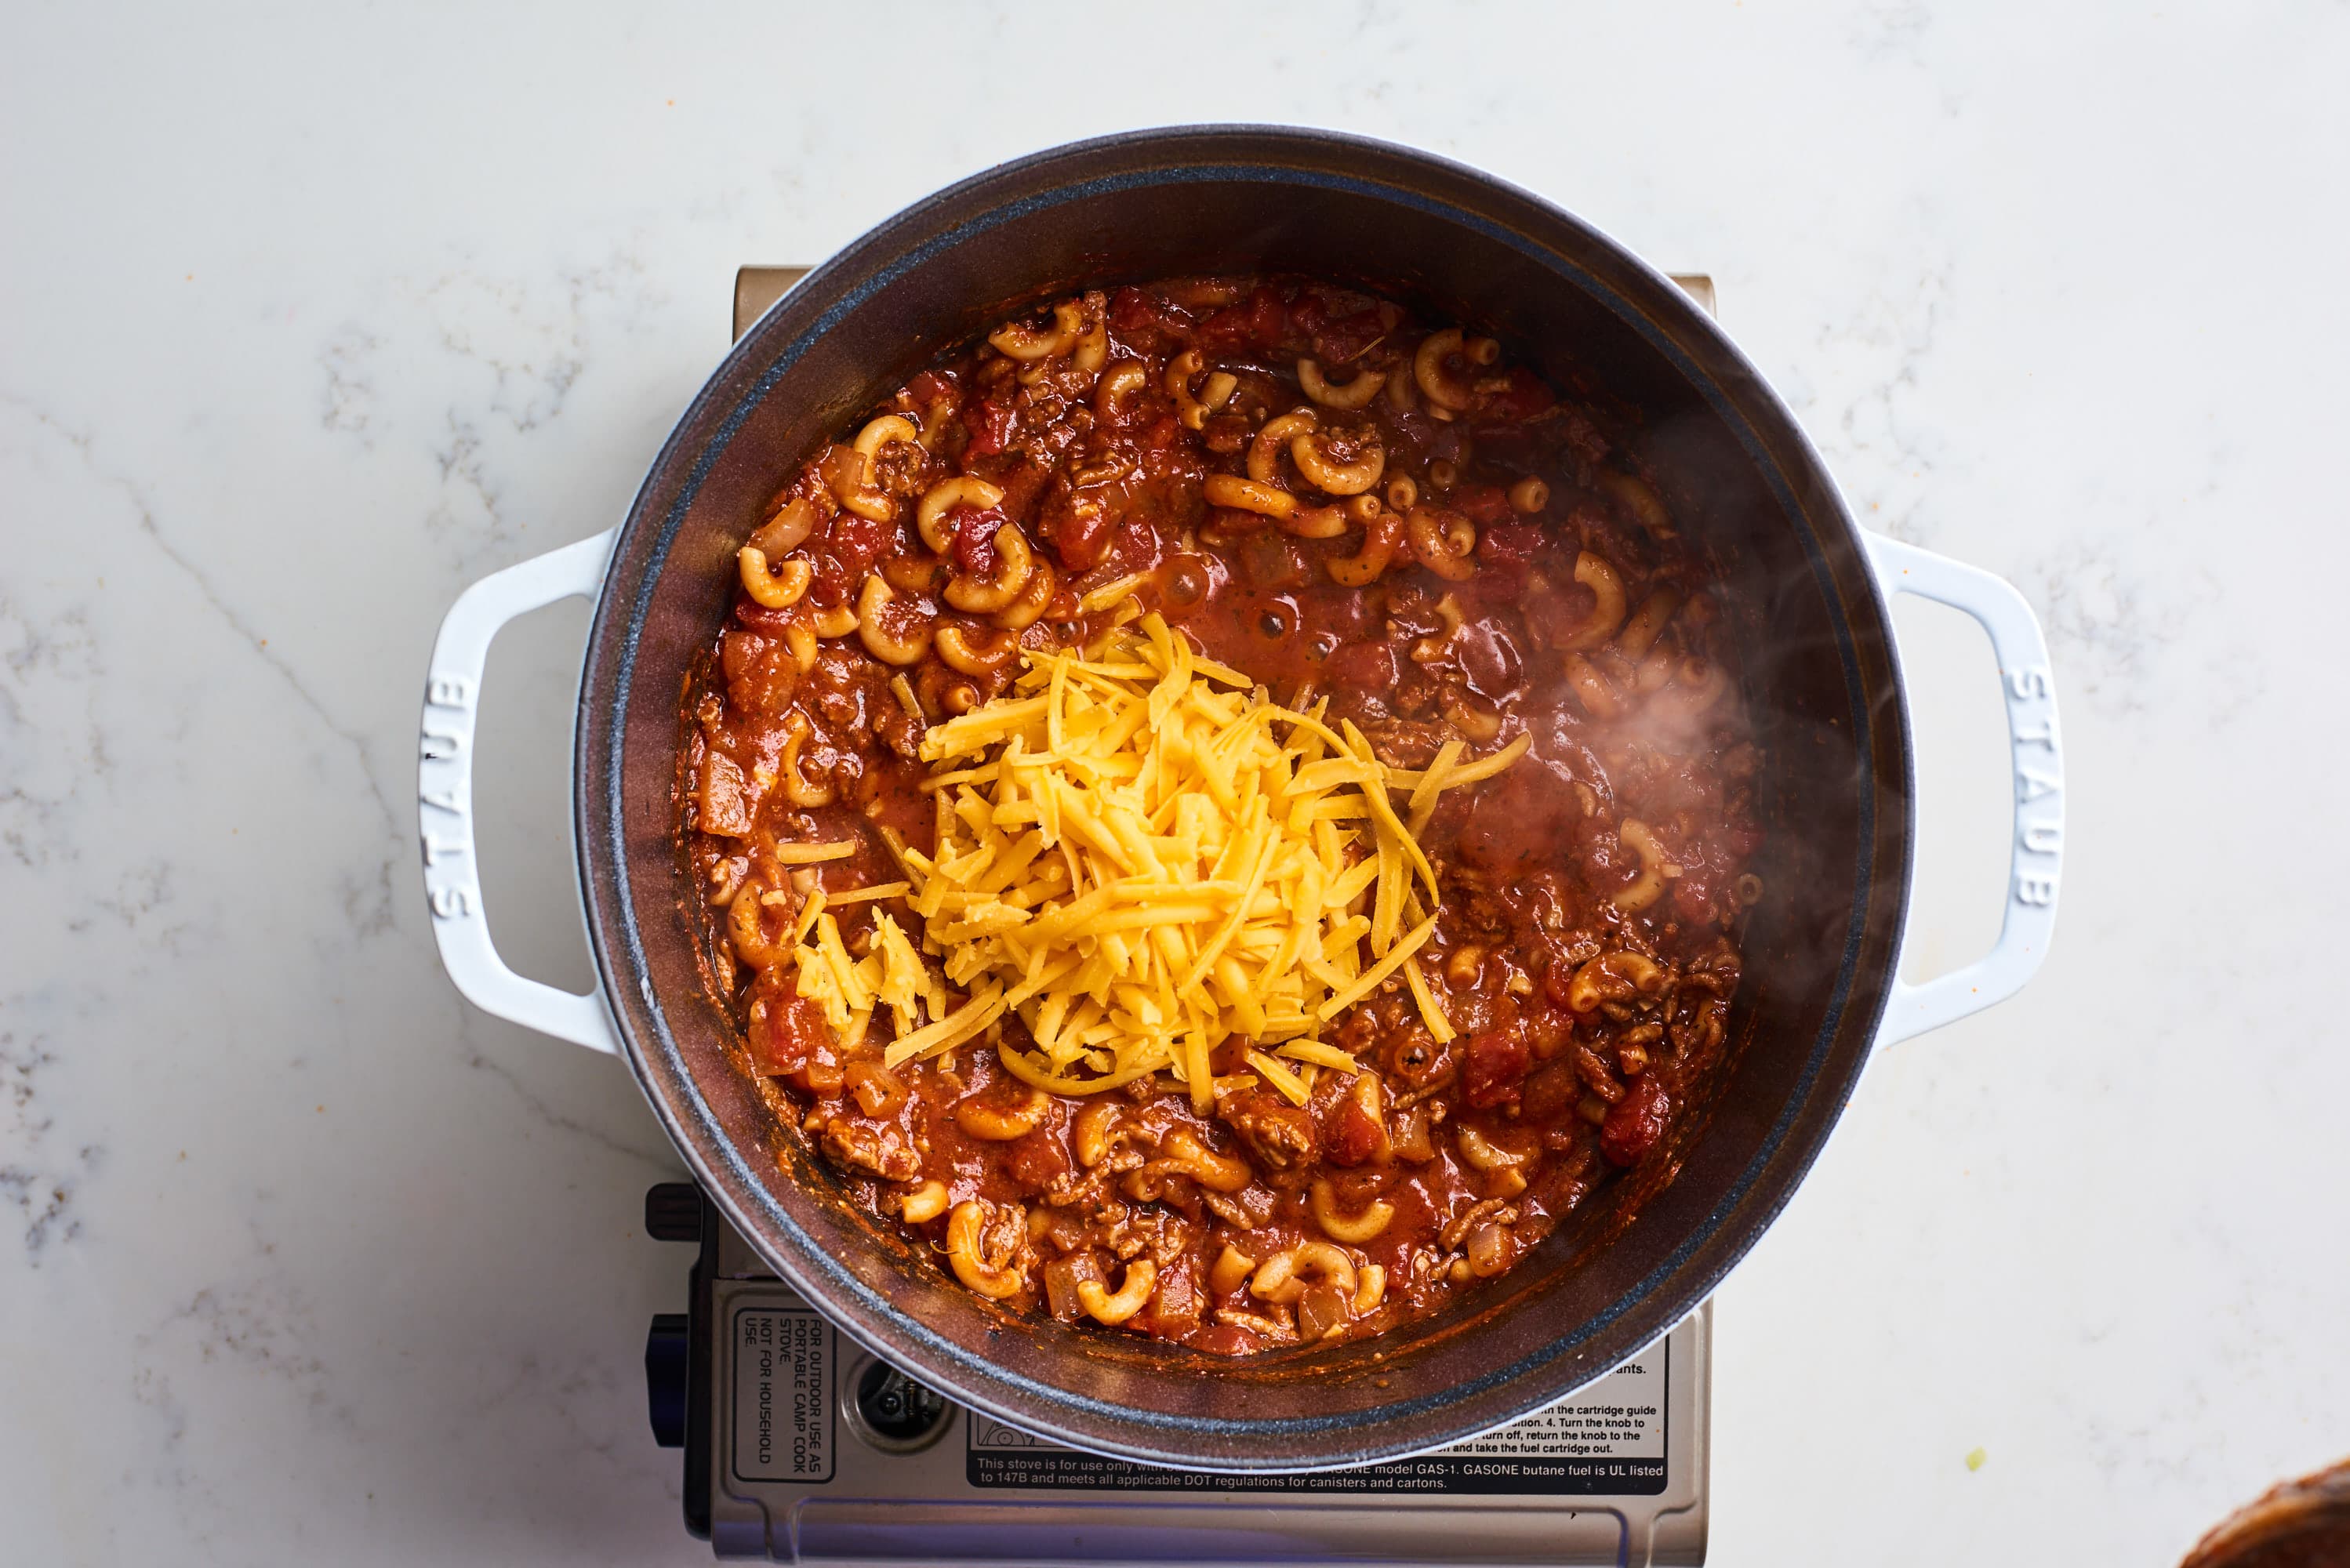 How To Make Old-Fashioned American Goulash | Kitchn